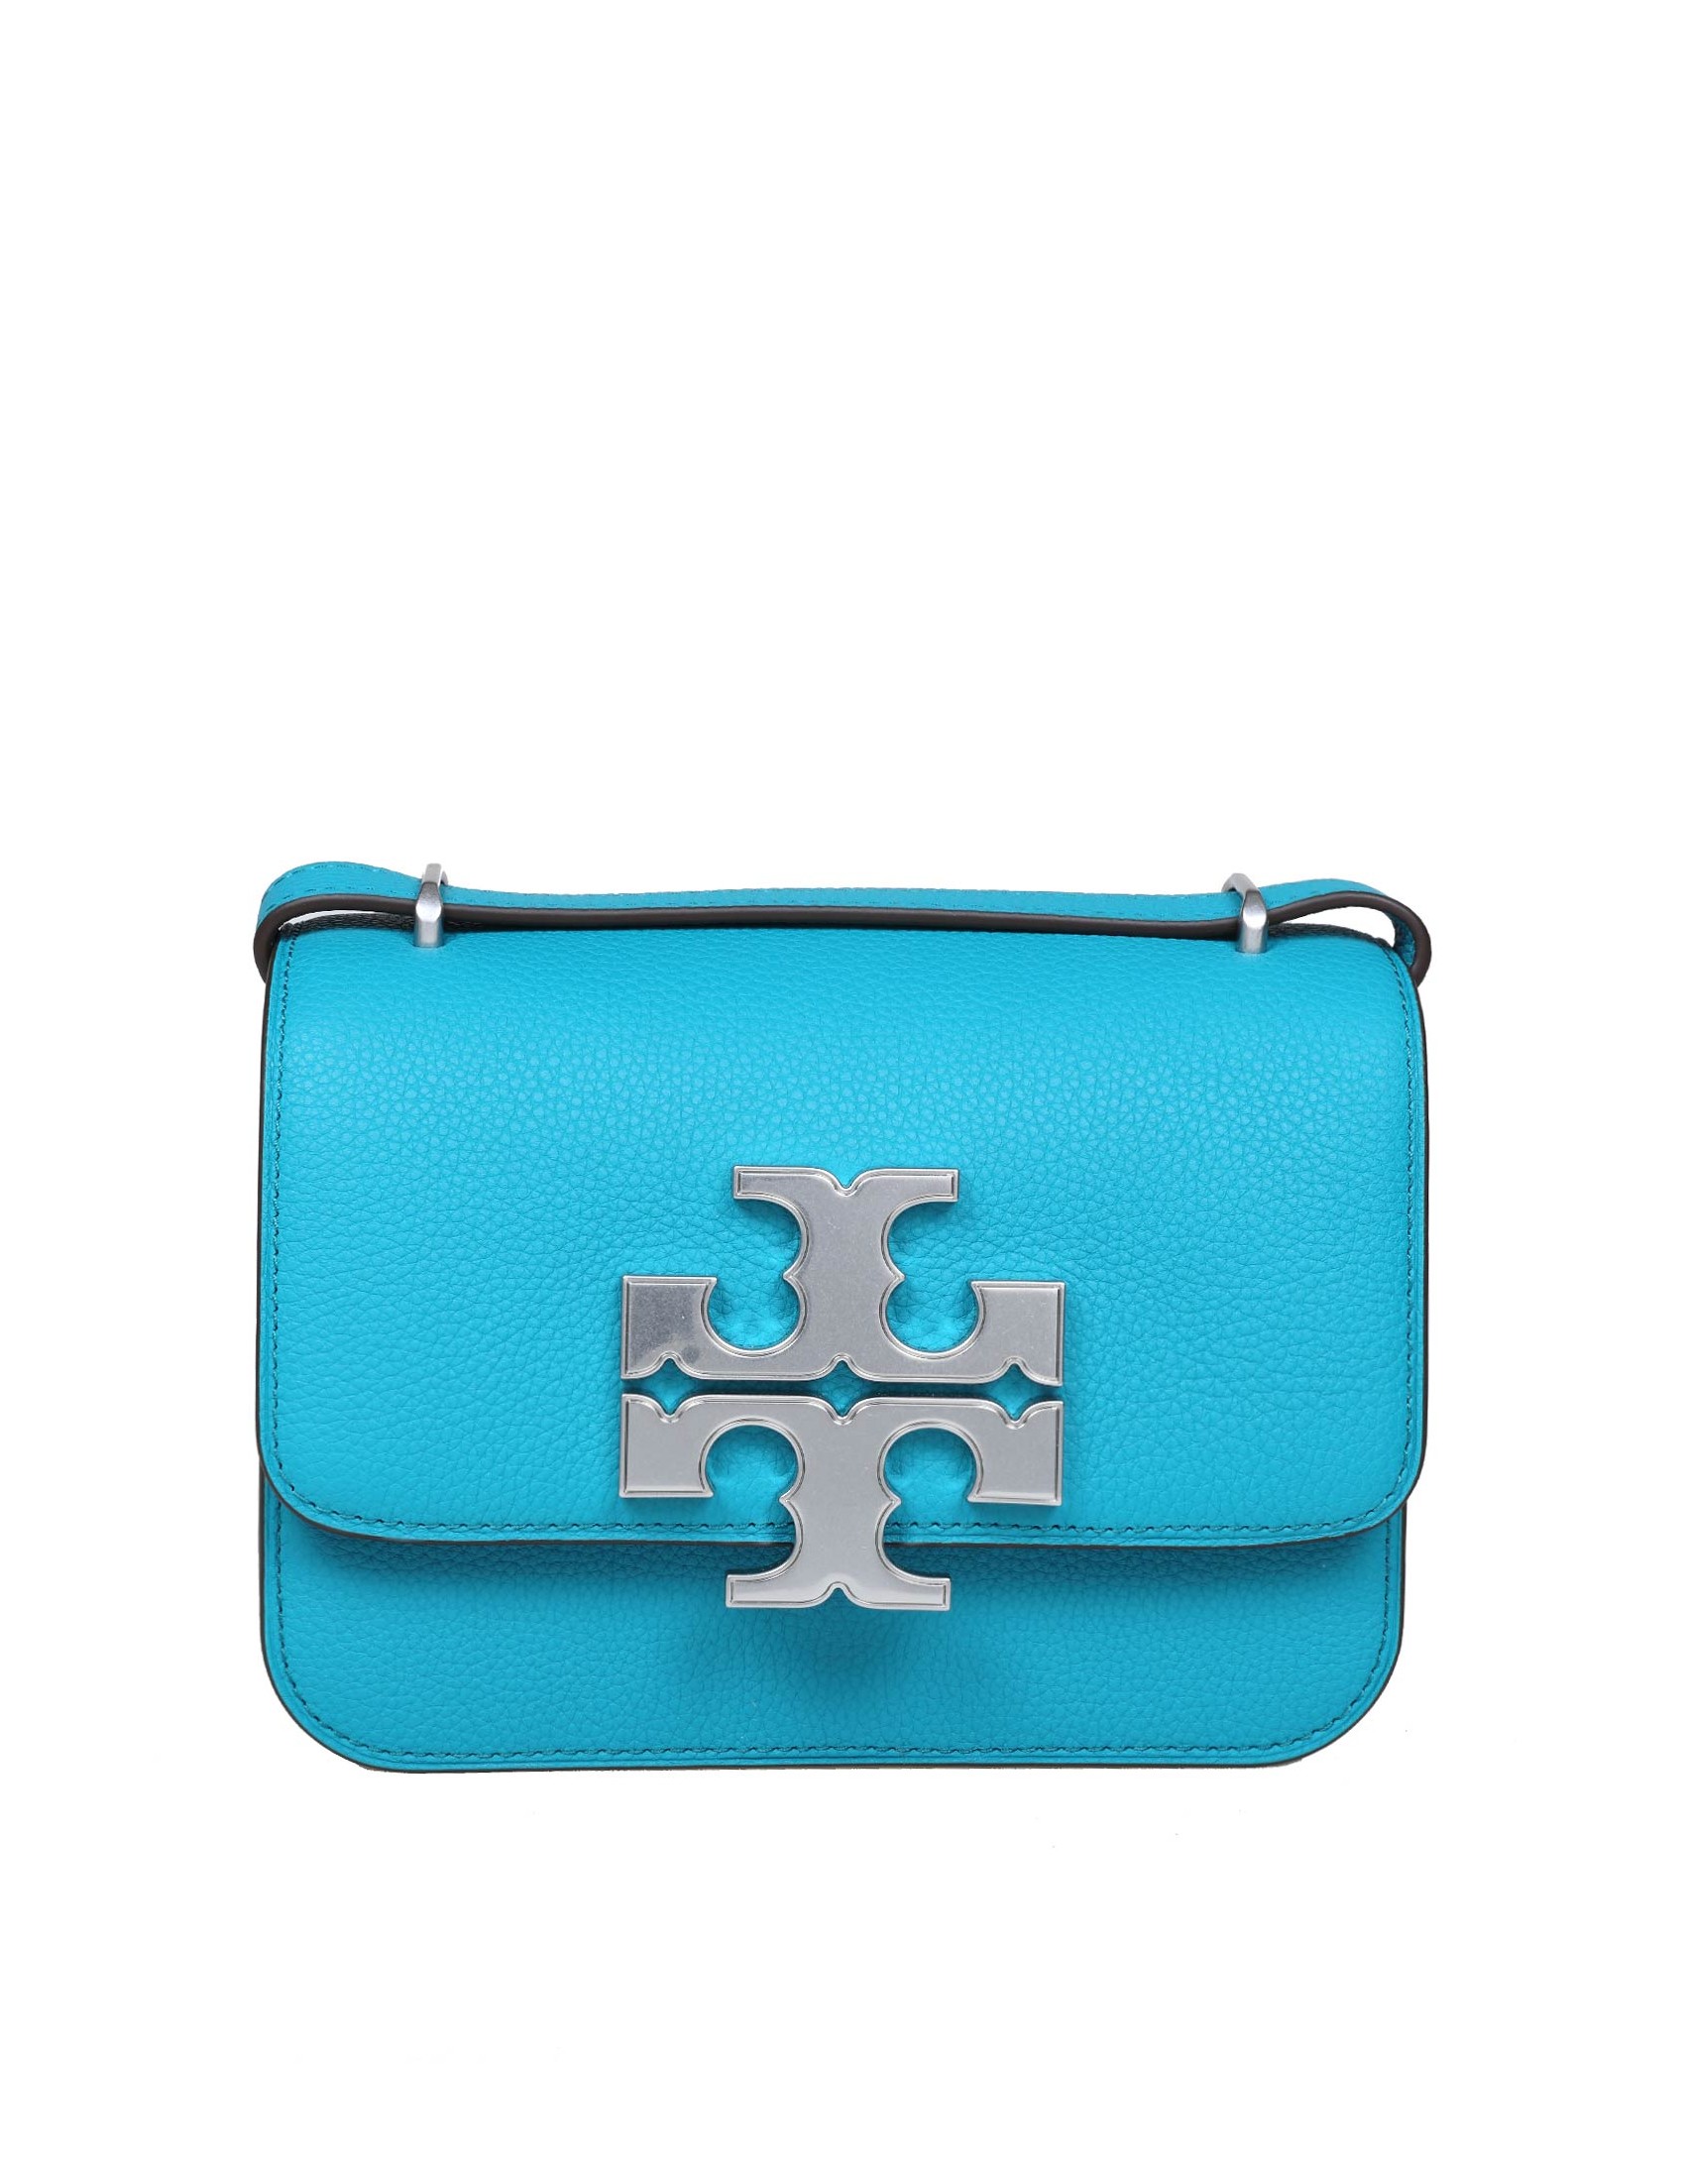 TORY BURCH SMALL ELEANOR SHOULDER BAG IN LEATHER